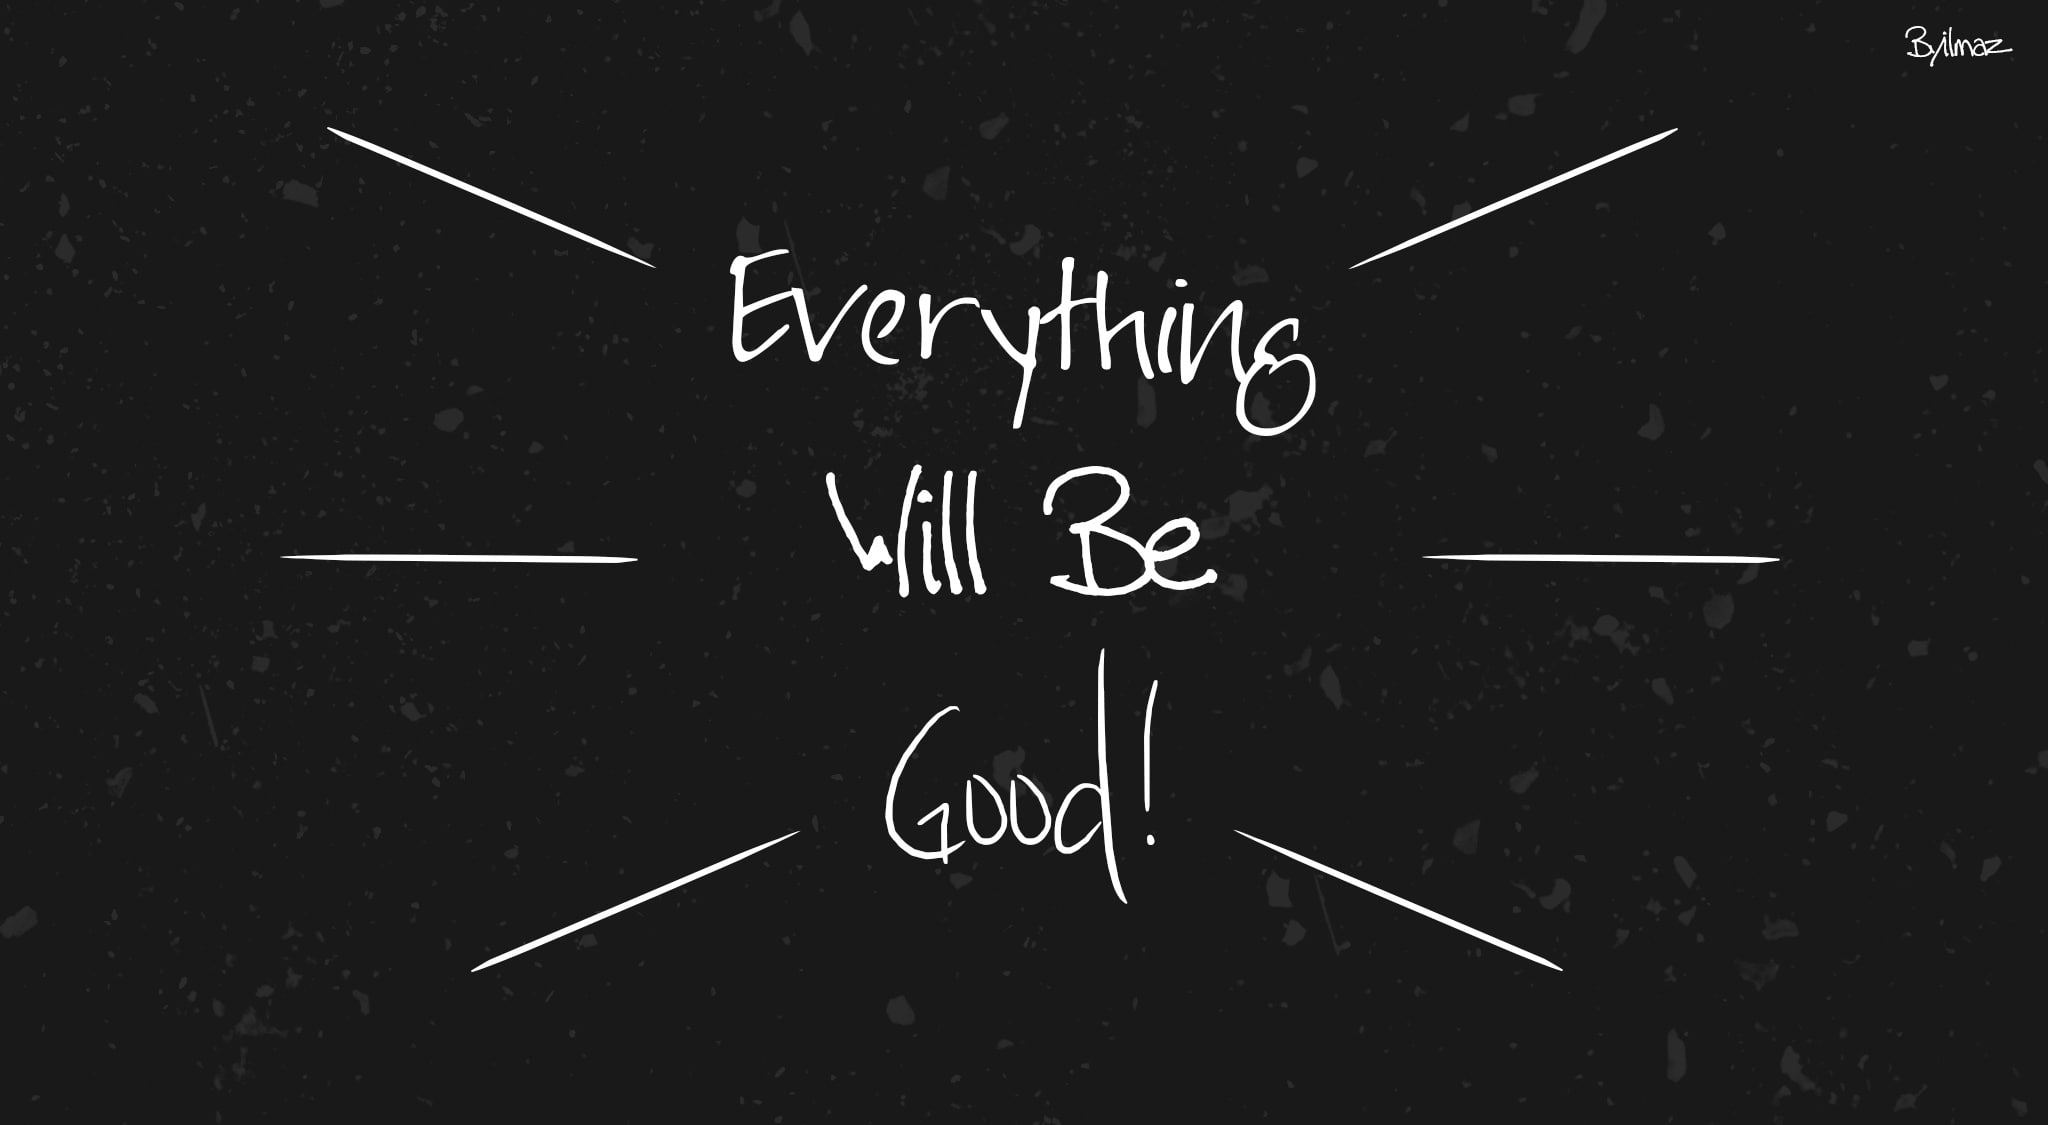 Everything Will Be Good - Byilmaz, Artistic, Typography, Quote